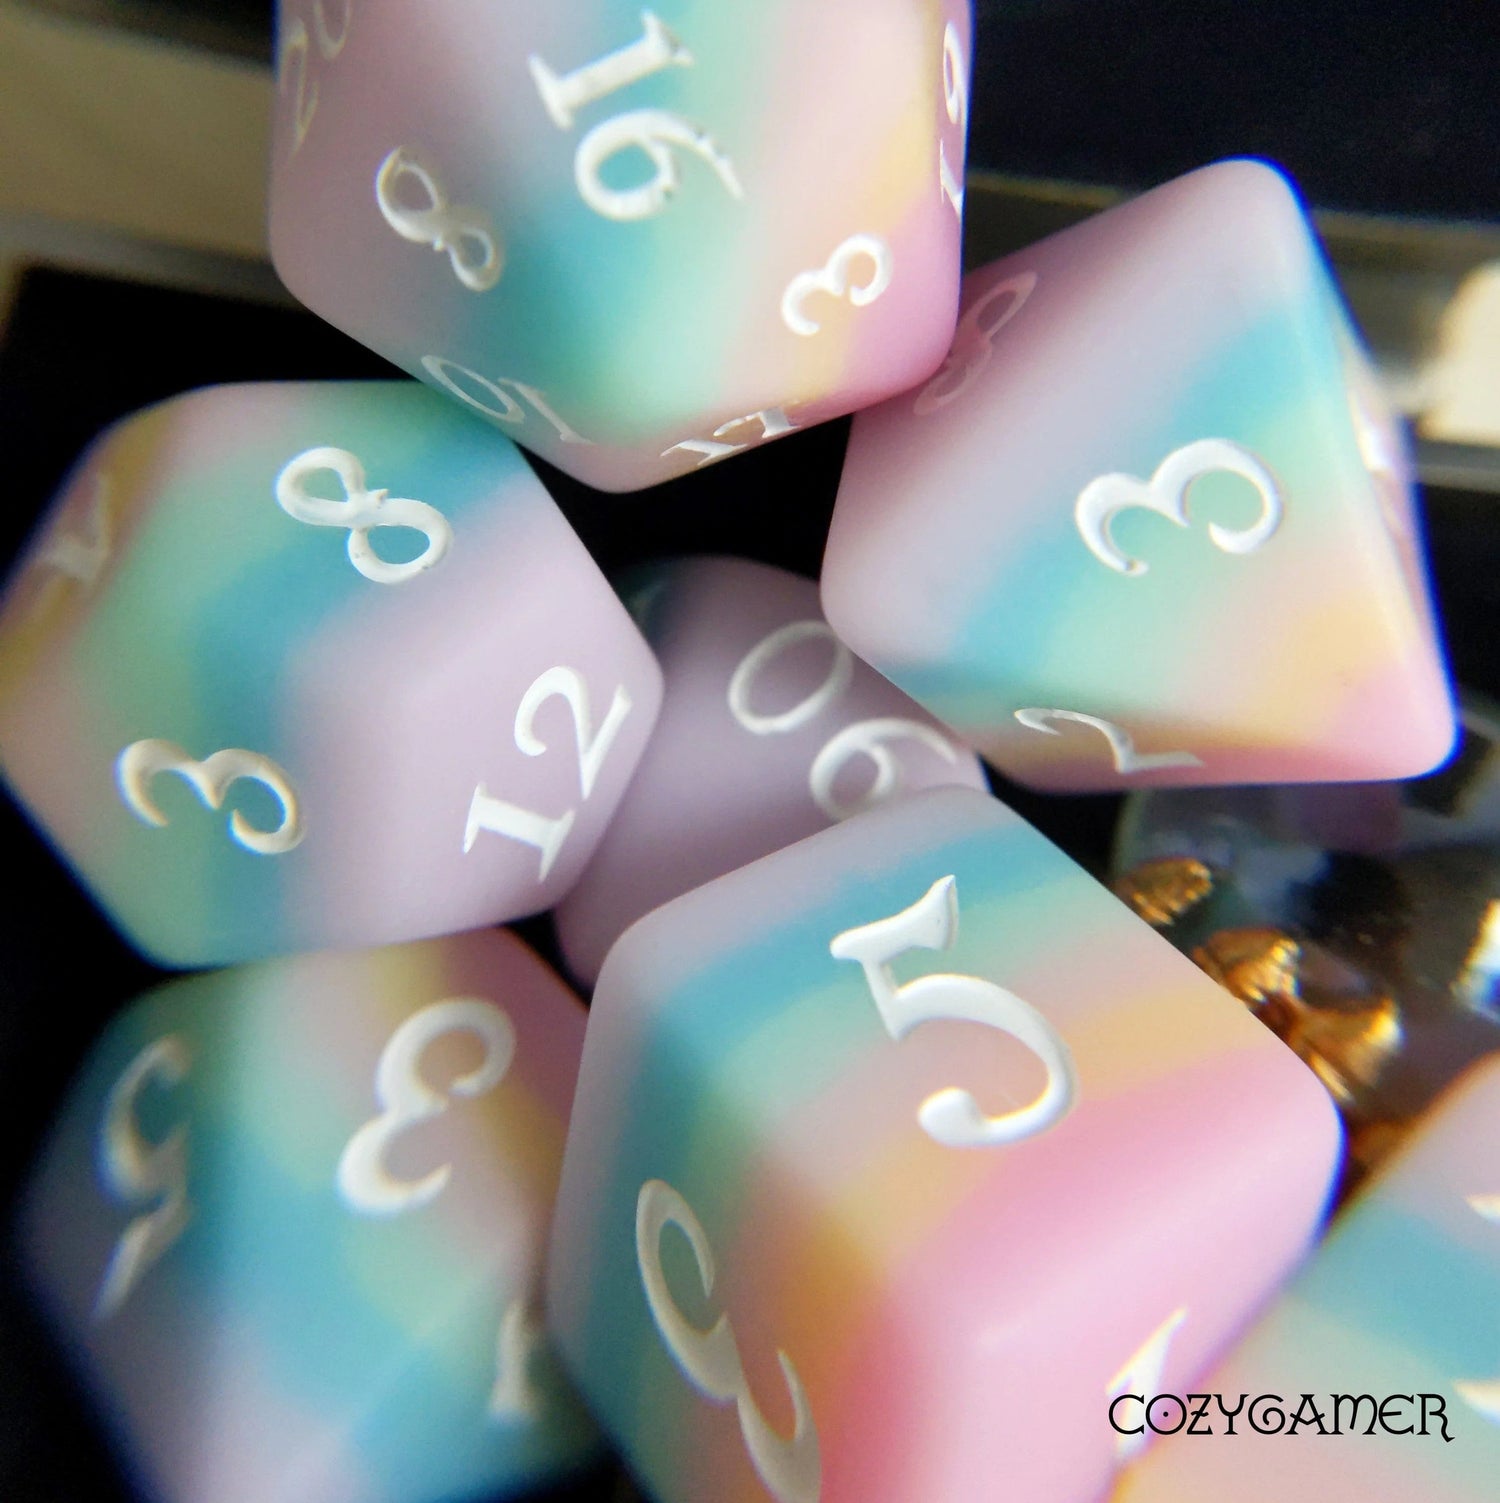 Dazed and Dreamy - 7 Dice Set - The Fourth Place